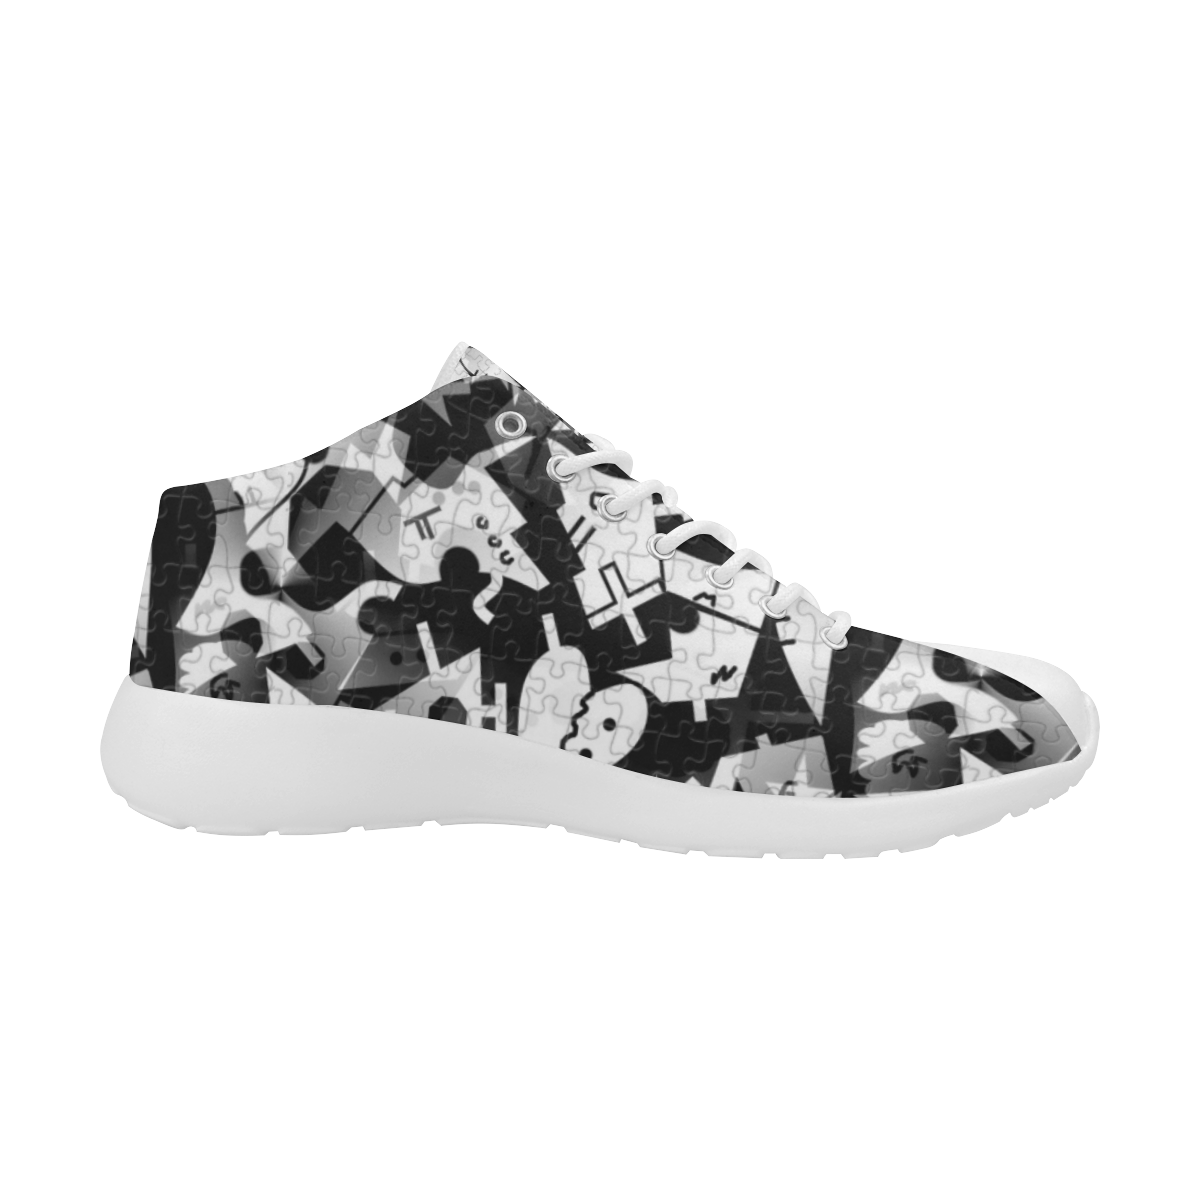 Black and White Pop Art by Nico Bielow Men's Basketball Training Shoes (Model 47502)